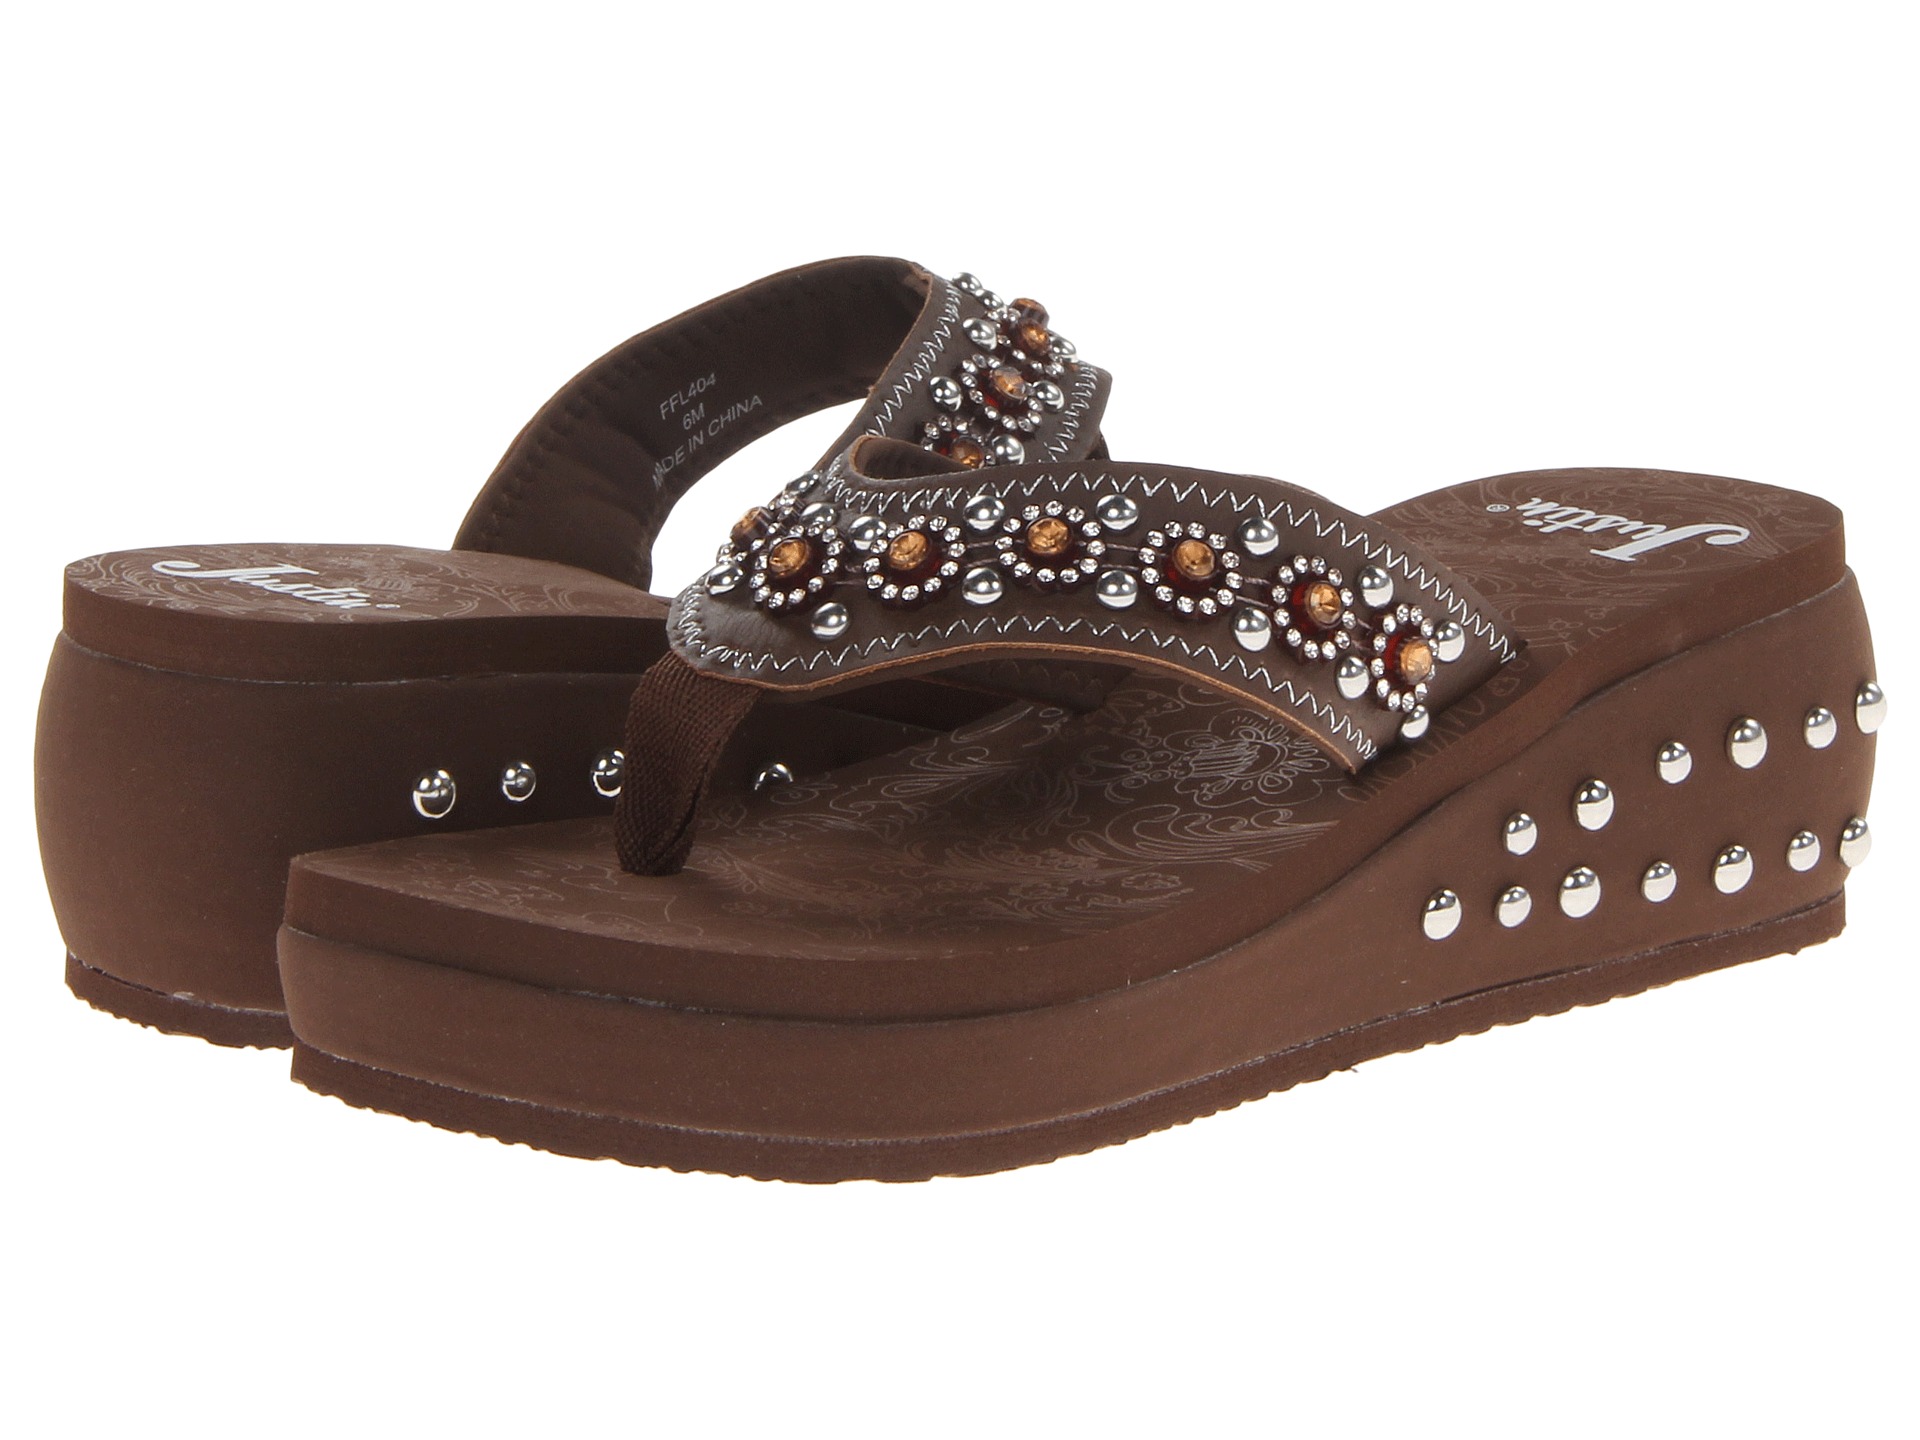 Justin Studded Wedge Brown | Shipped Free at Zappos